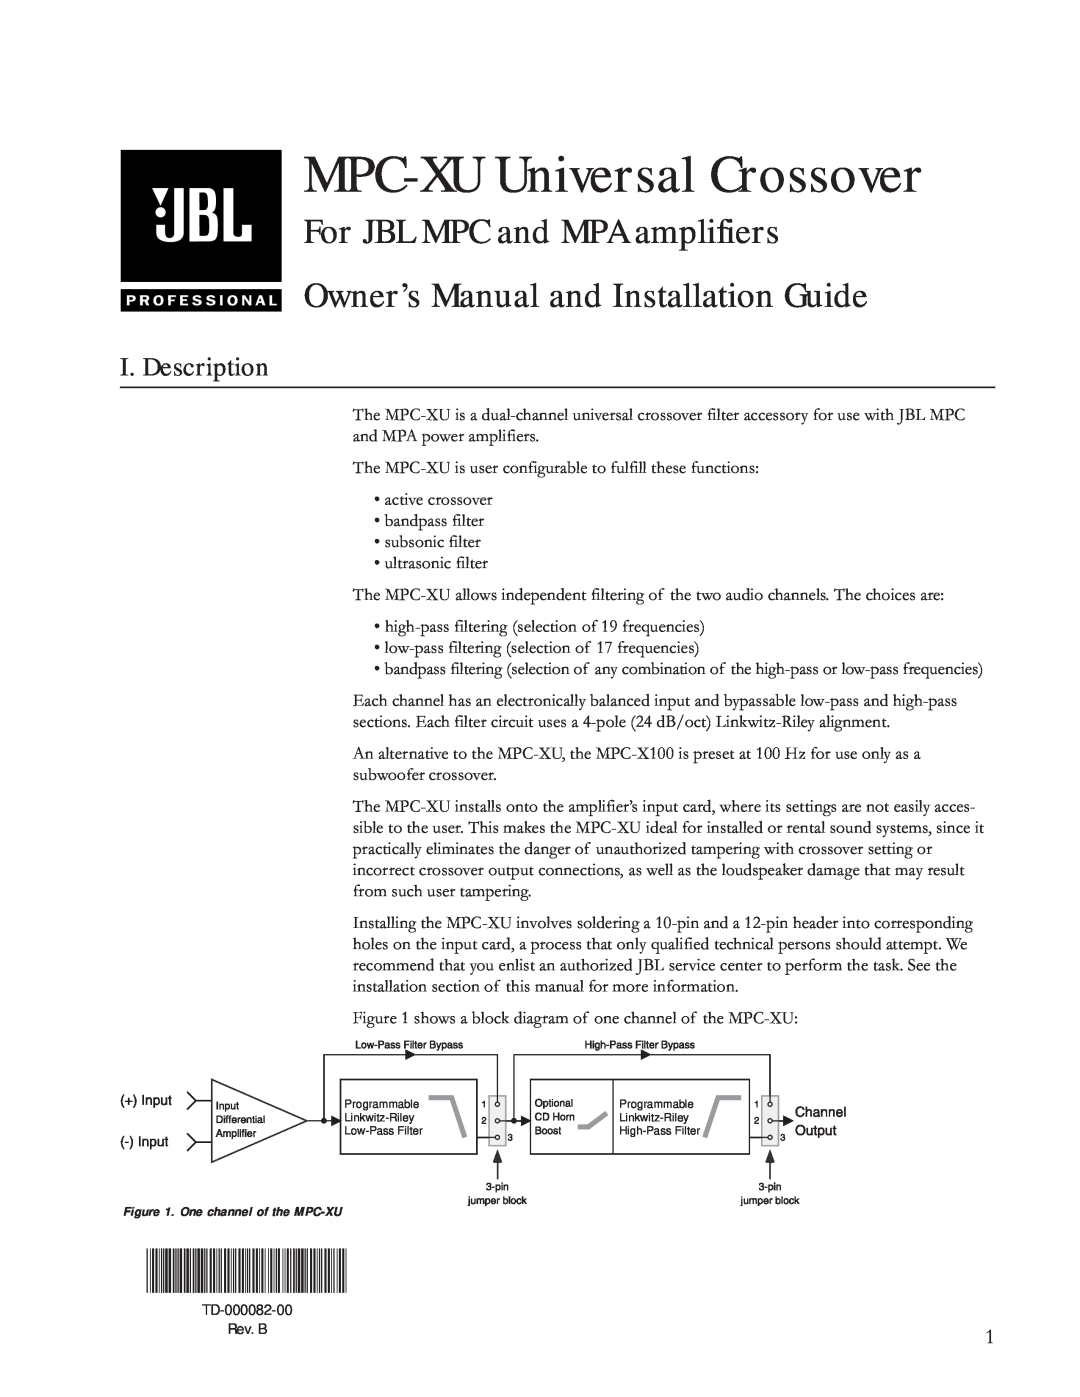 JBL Professional owner manual I. Description, MPC-XUUniversal Crossover, TD-000082-00, For JBL MPC and MPA amplifiers 